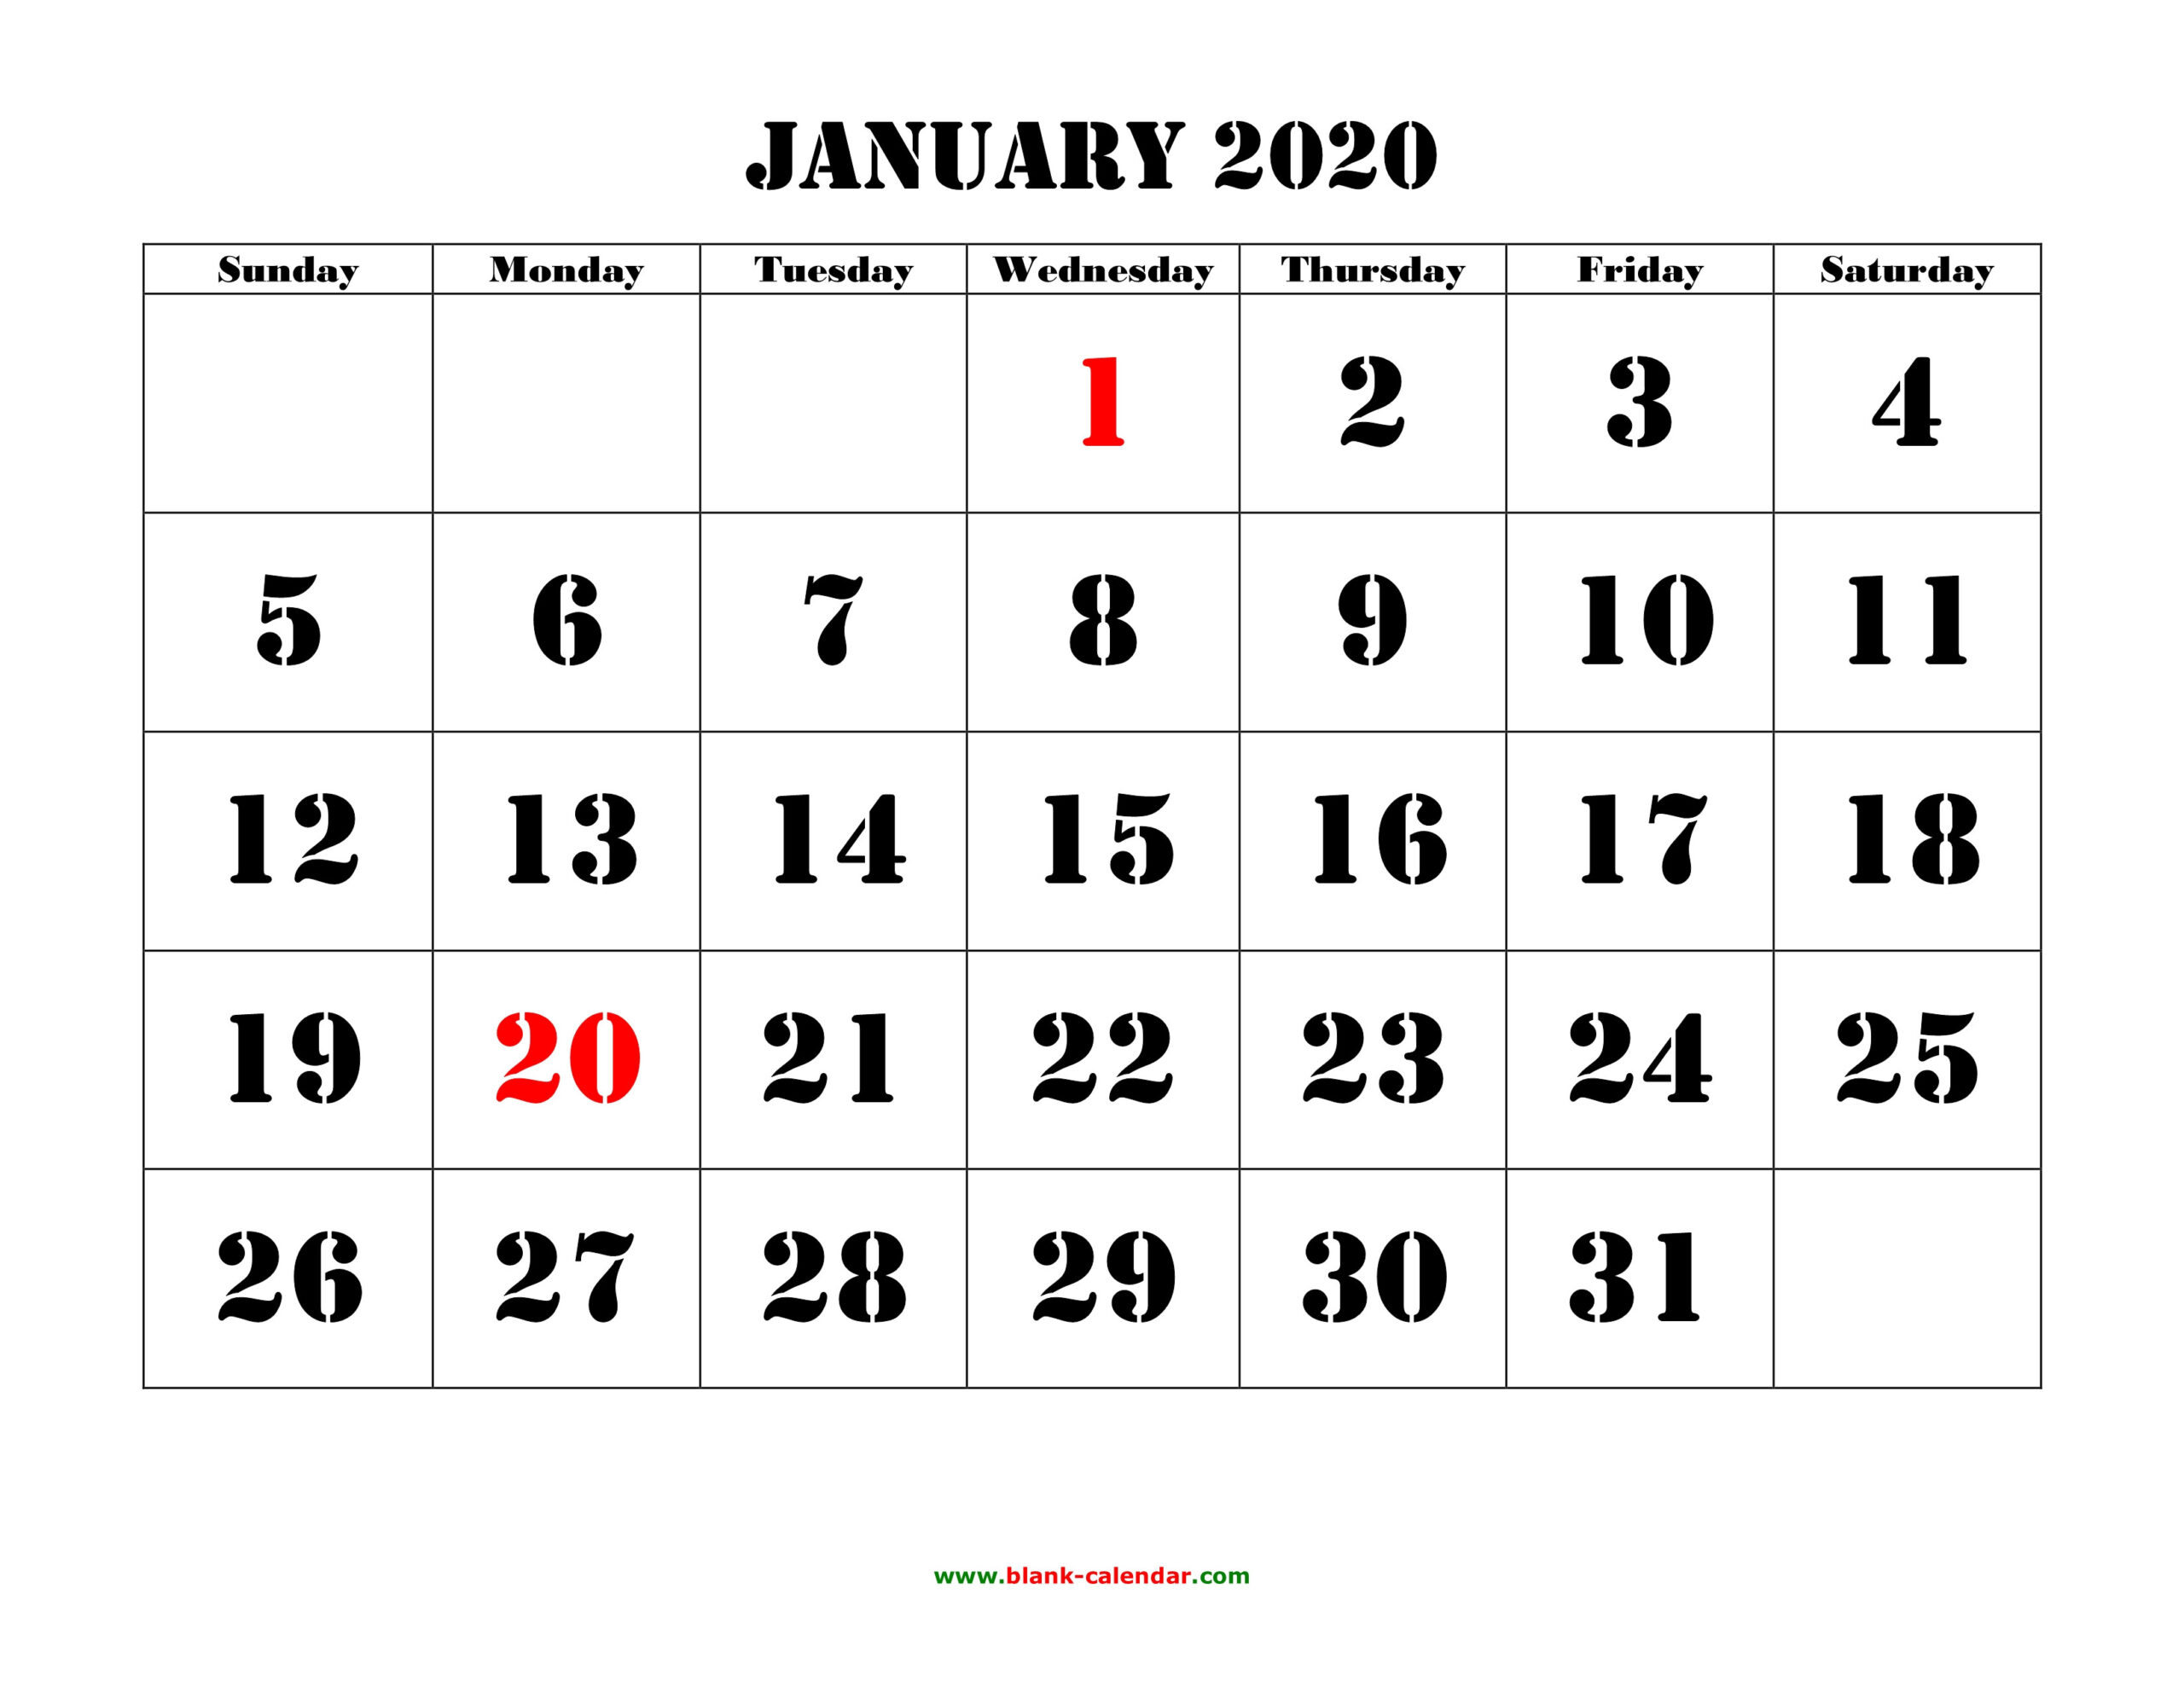 Print Free 2020 Calendars Without Downloading | Calendar  Print Free Blank Calendar Without Downloading